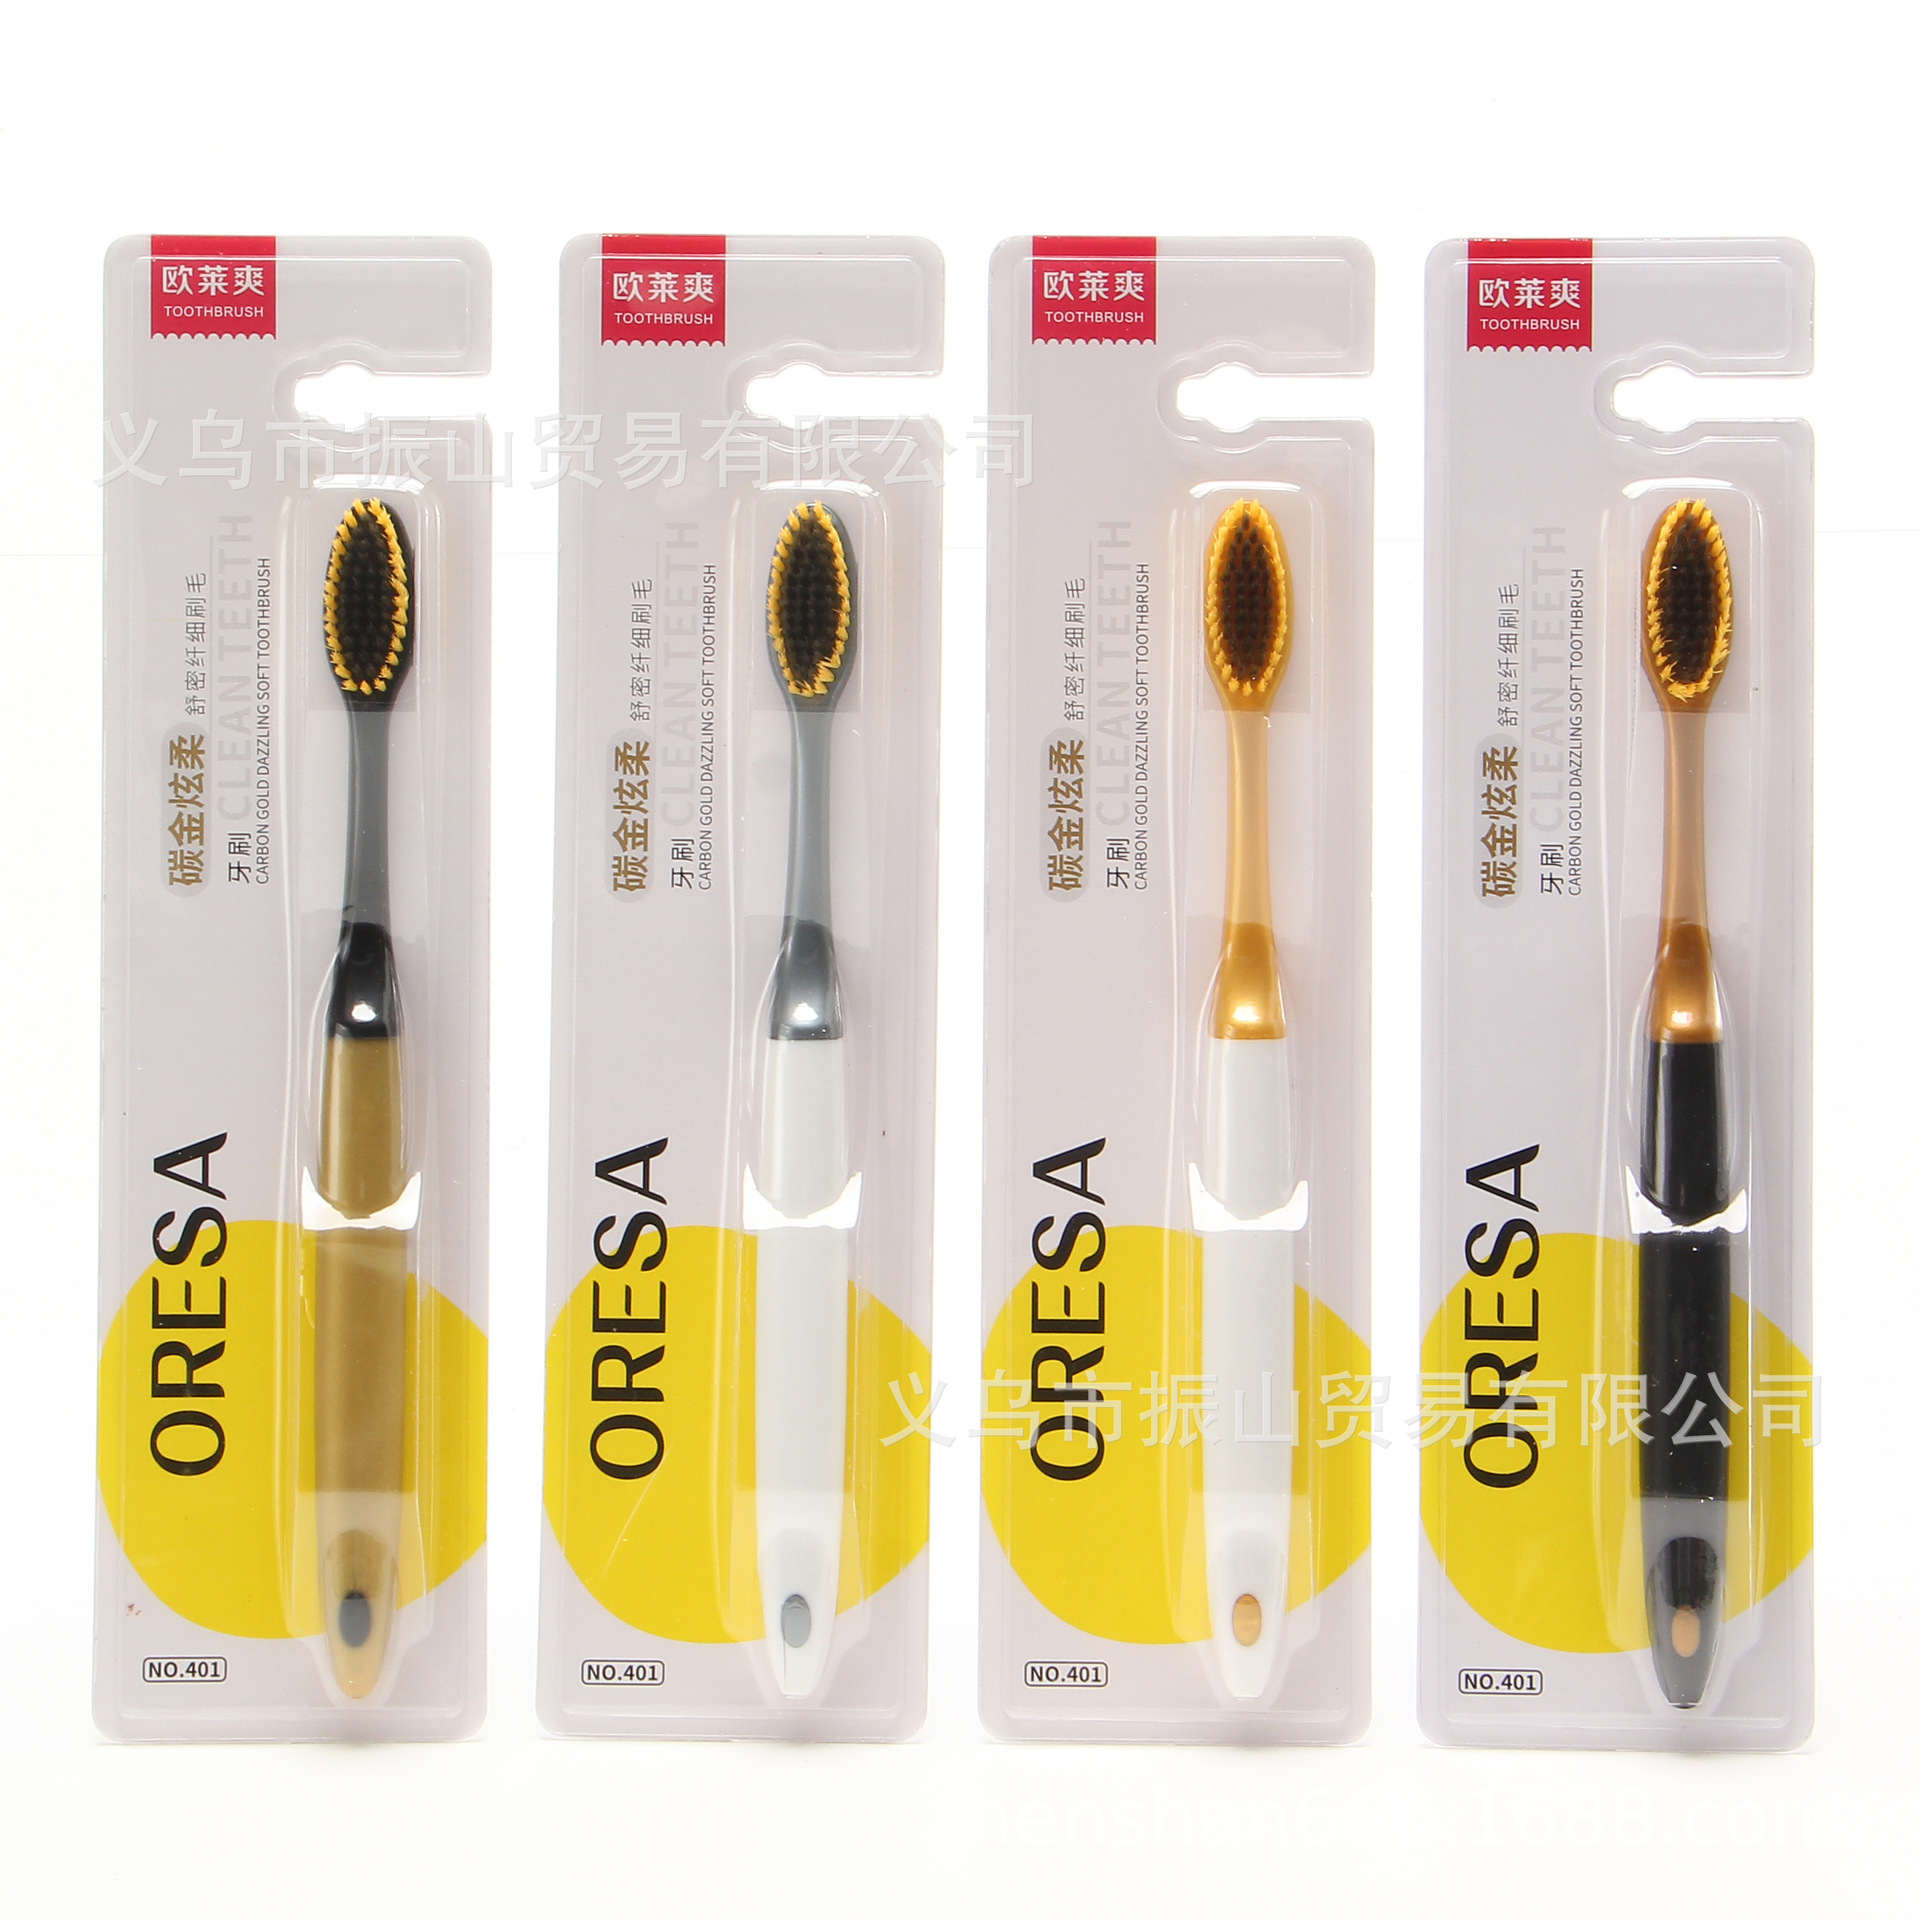 Olaishuang 401 Shumi Fiber Soft Series Carbon Gold Combination Healthy Gum Soft-Bristle Toothbrush